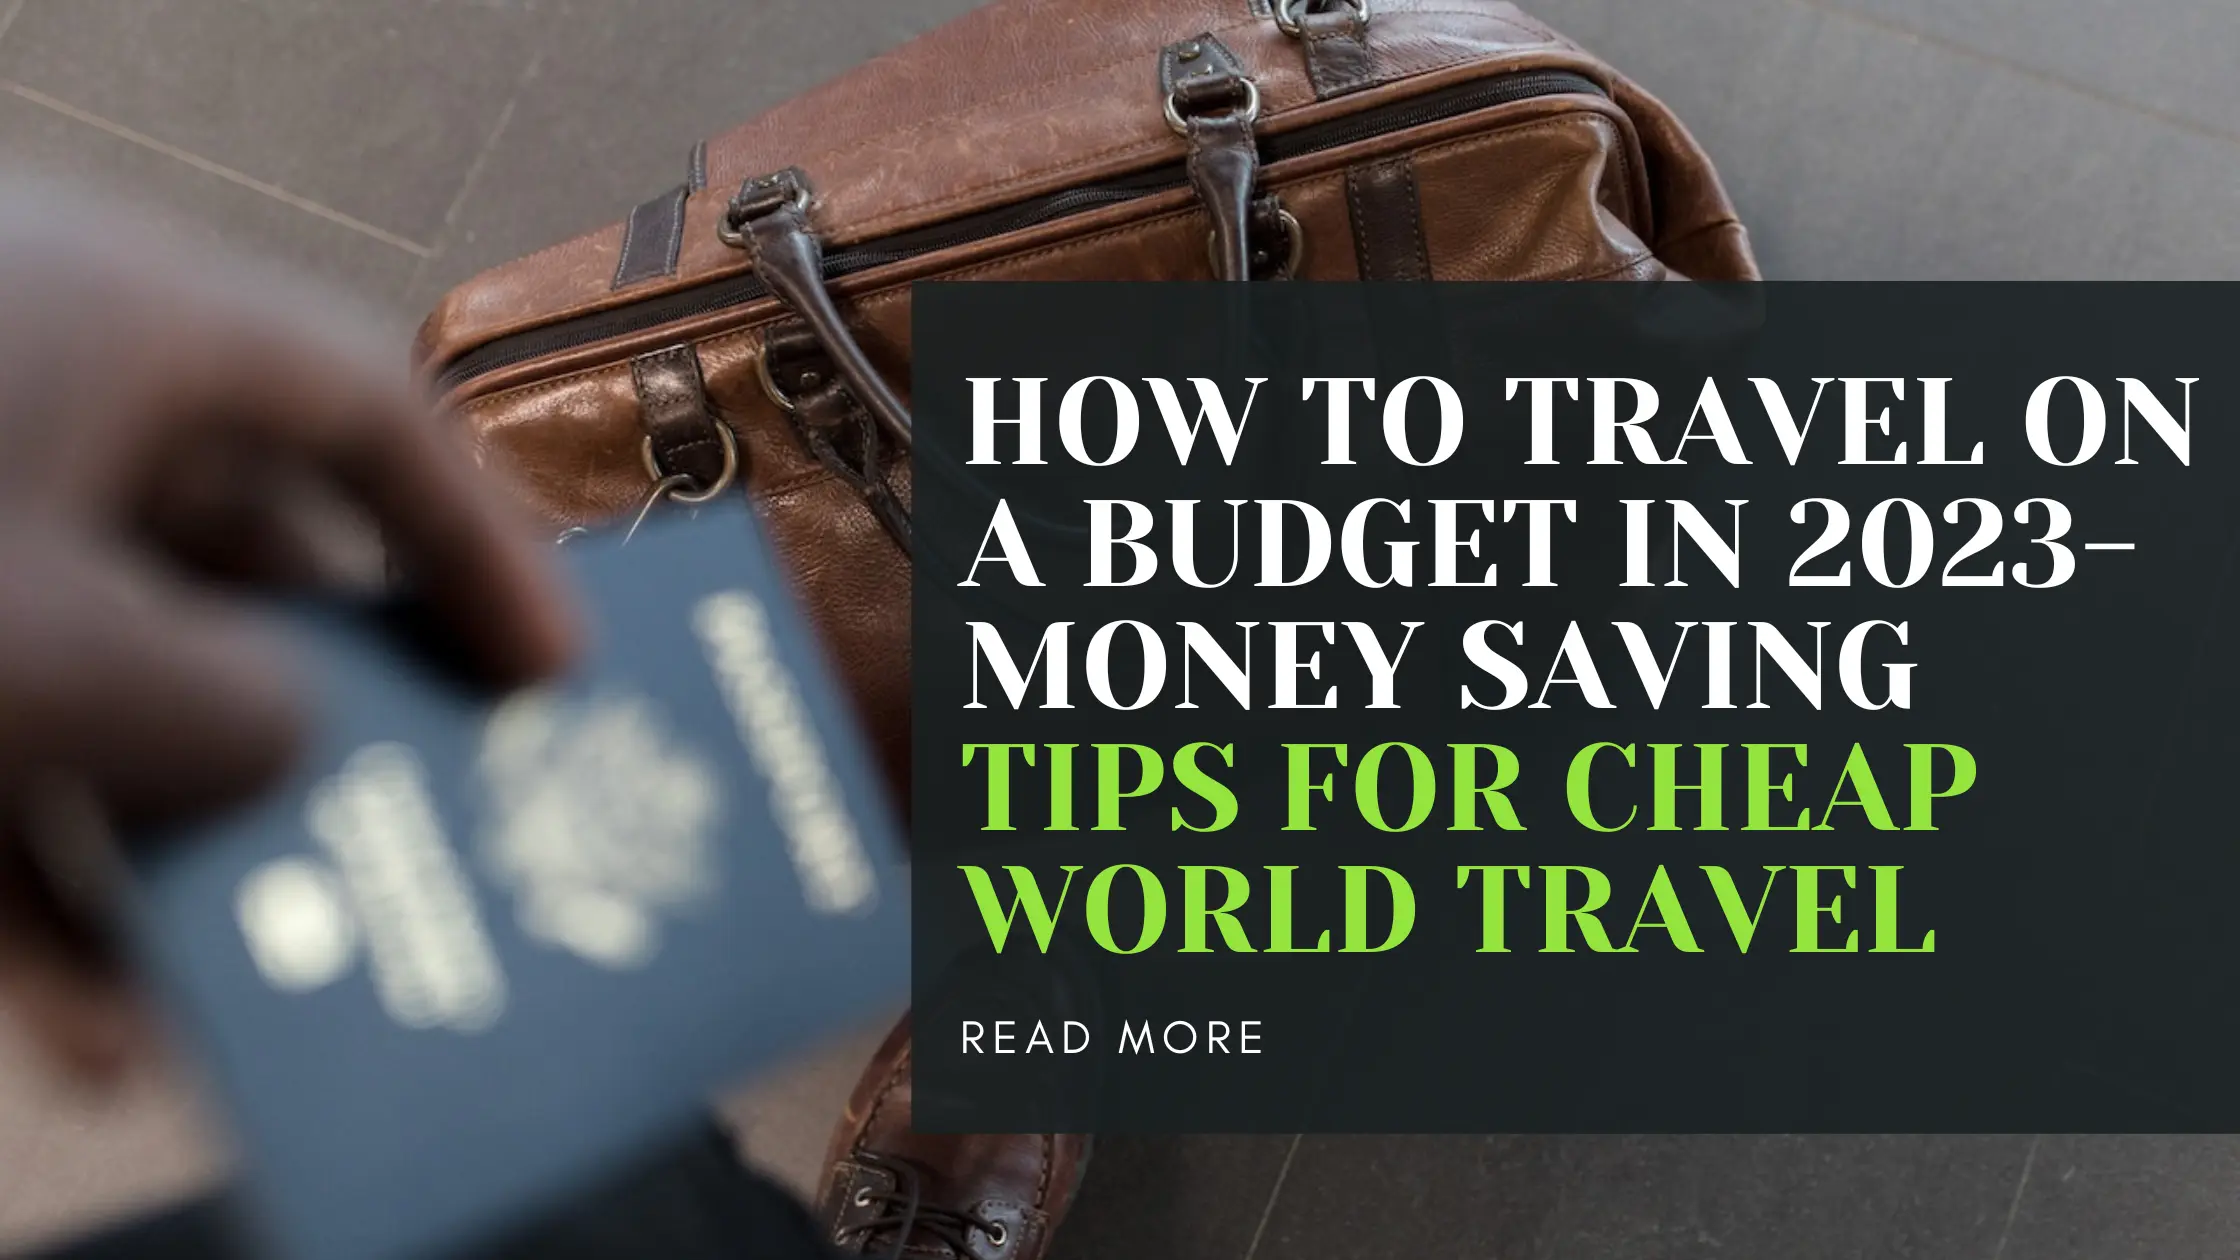 How to Travel on a Budget in 2023: Money Saving Tips for Cheap World Travel